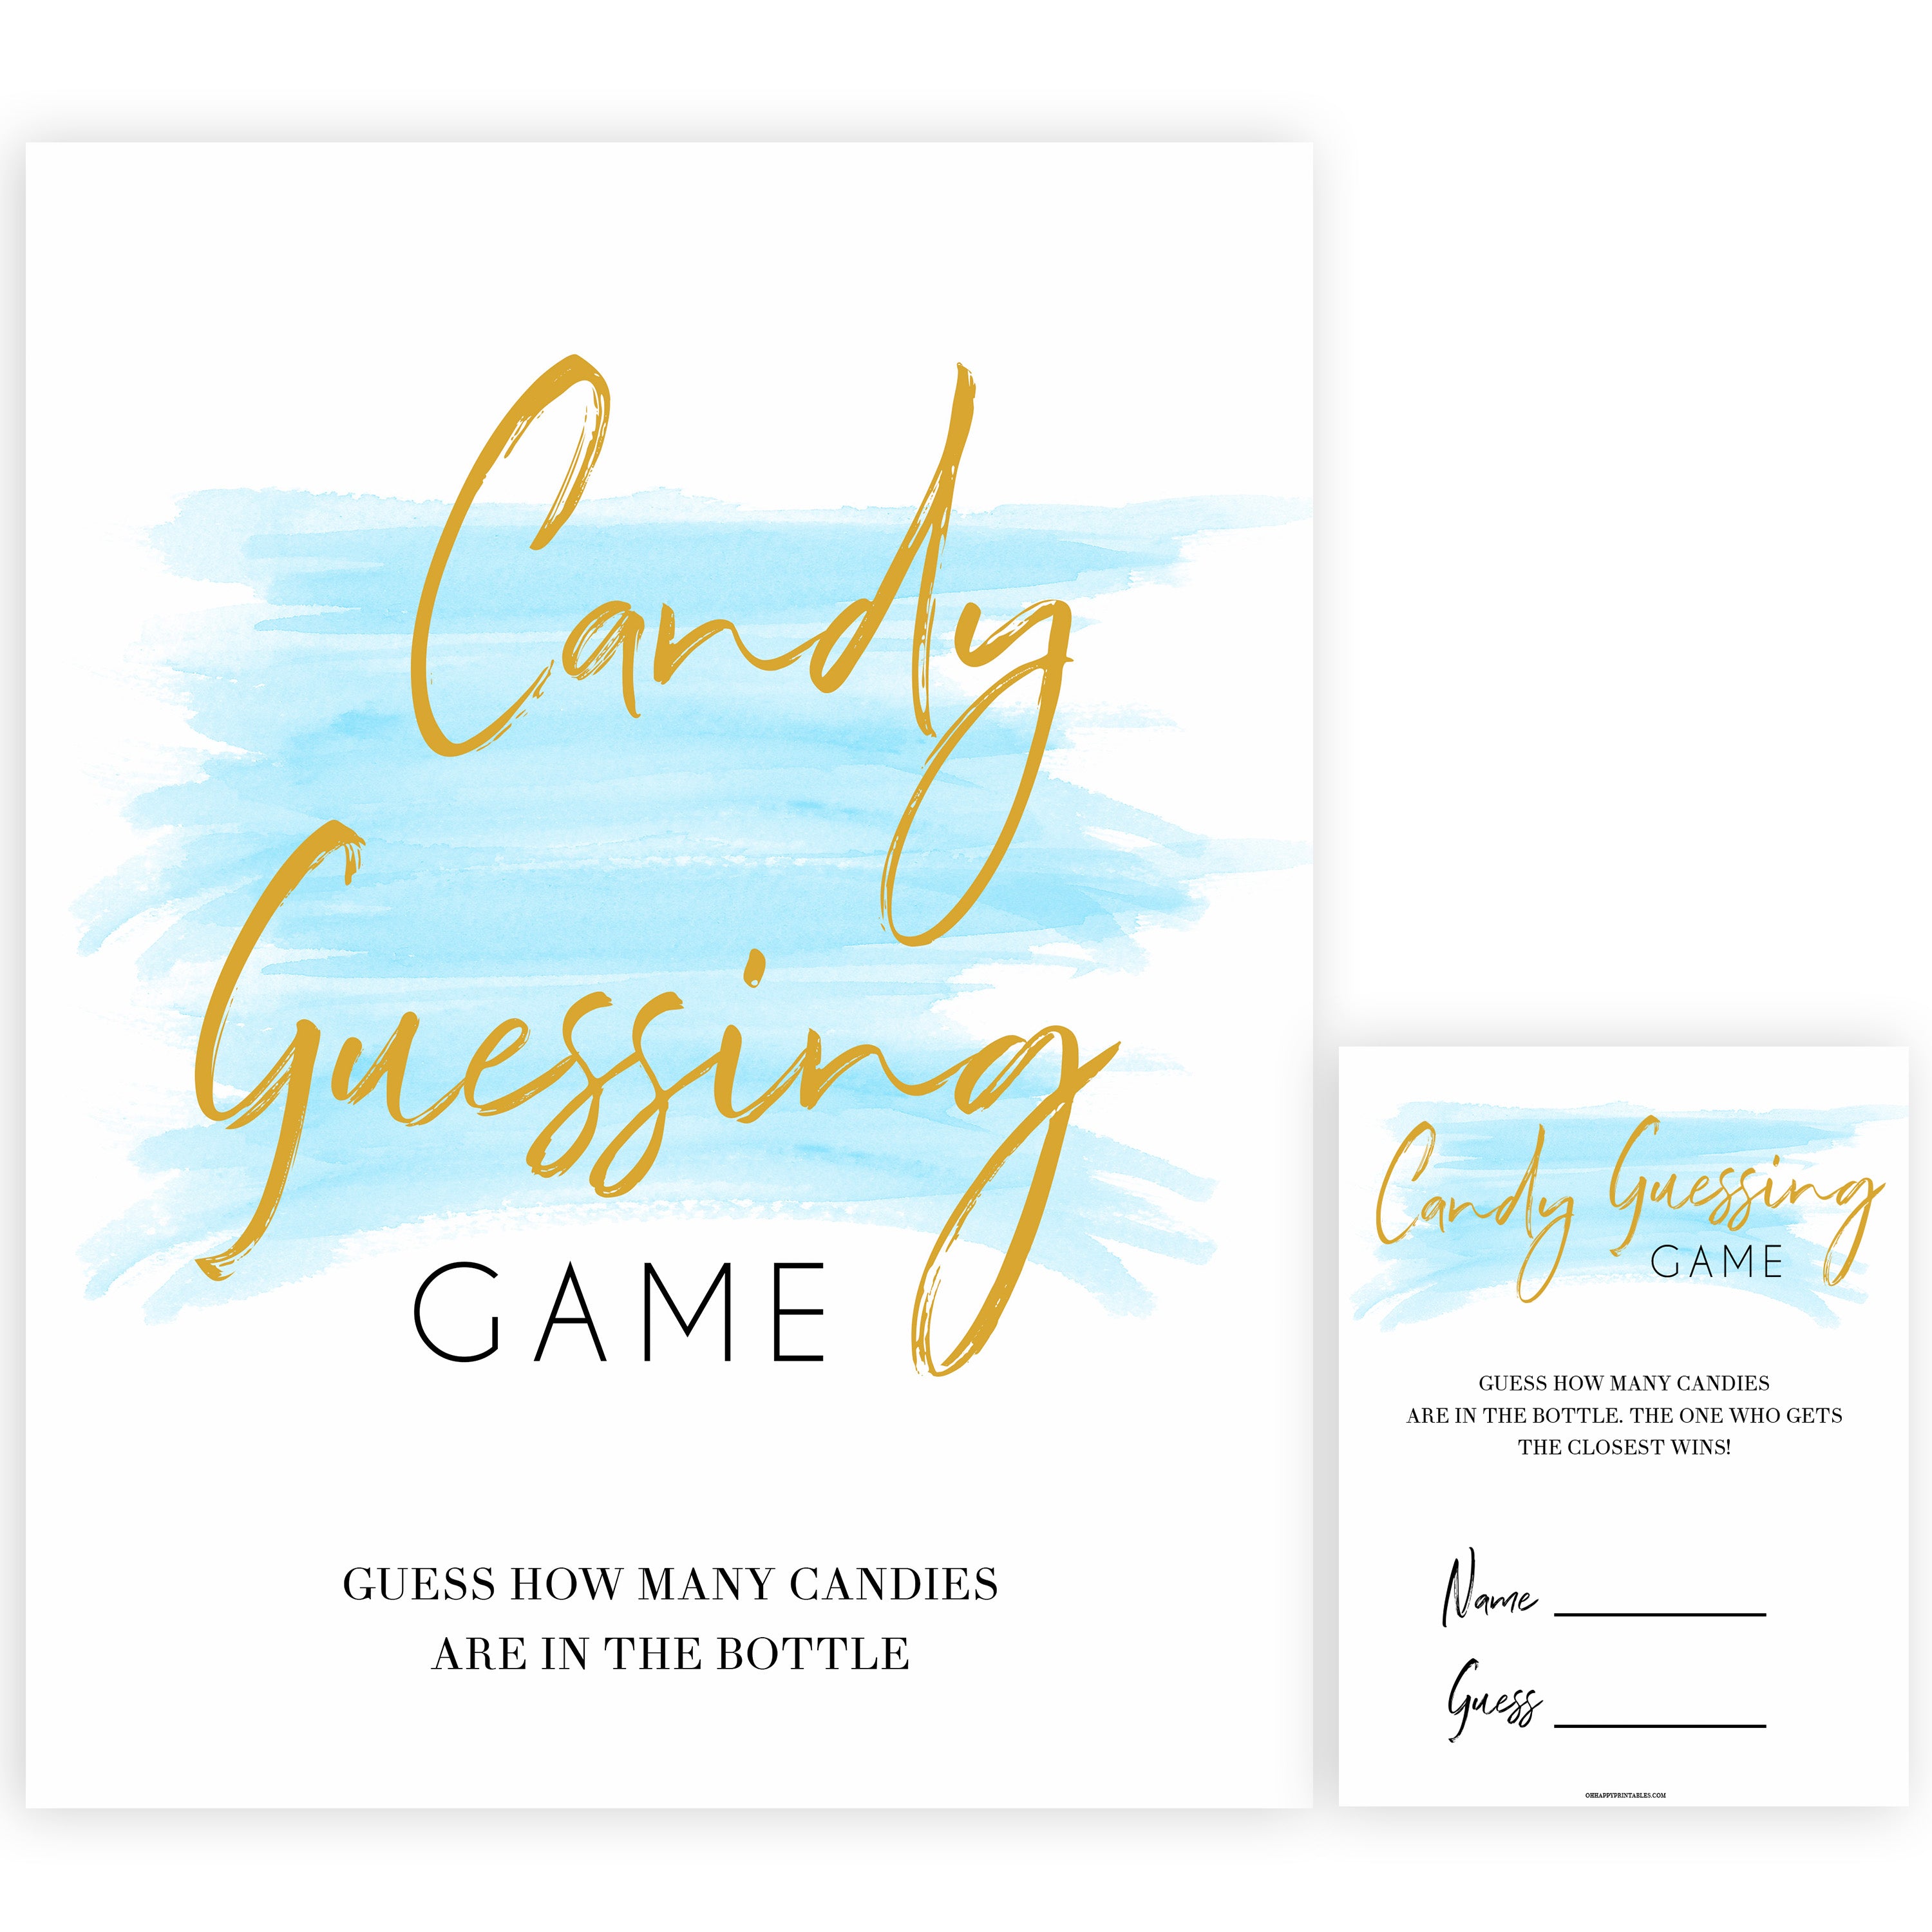 Blue swash, candy guessing game baby games, baby shower games, printable baby games, fun baby games, boy baby shower games, baby games, fun baby shower ideas, baby shower ideas, boy baby games, blue baby shower